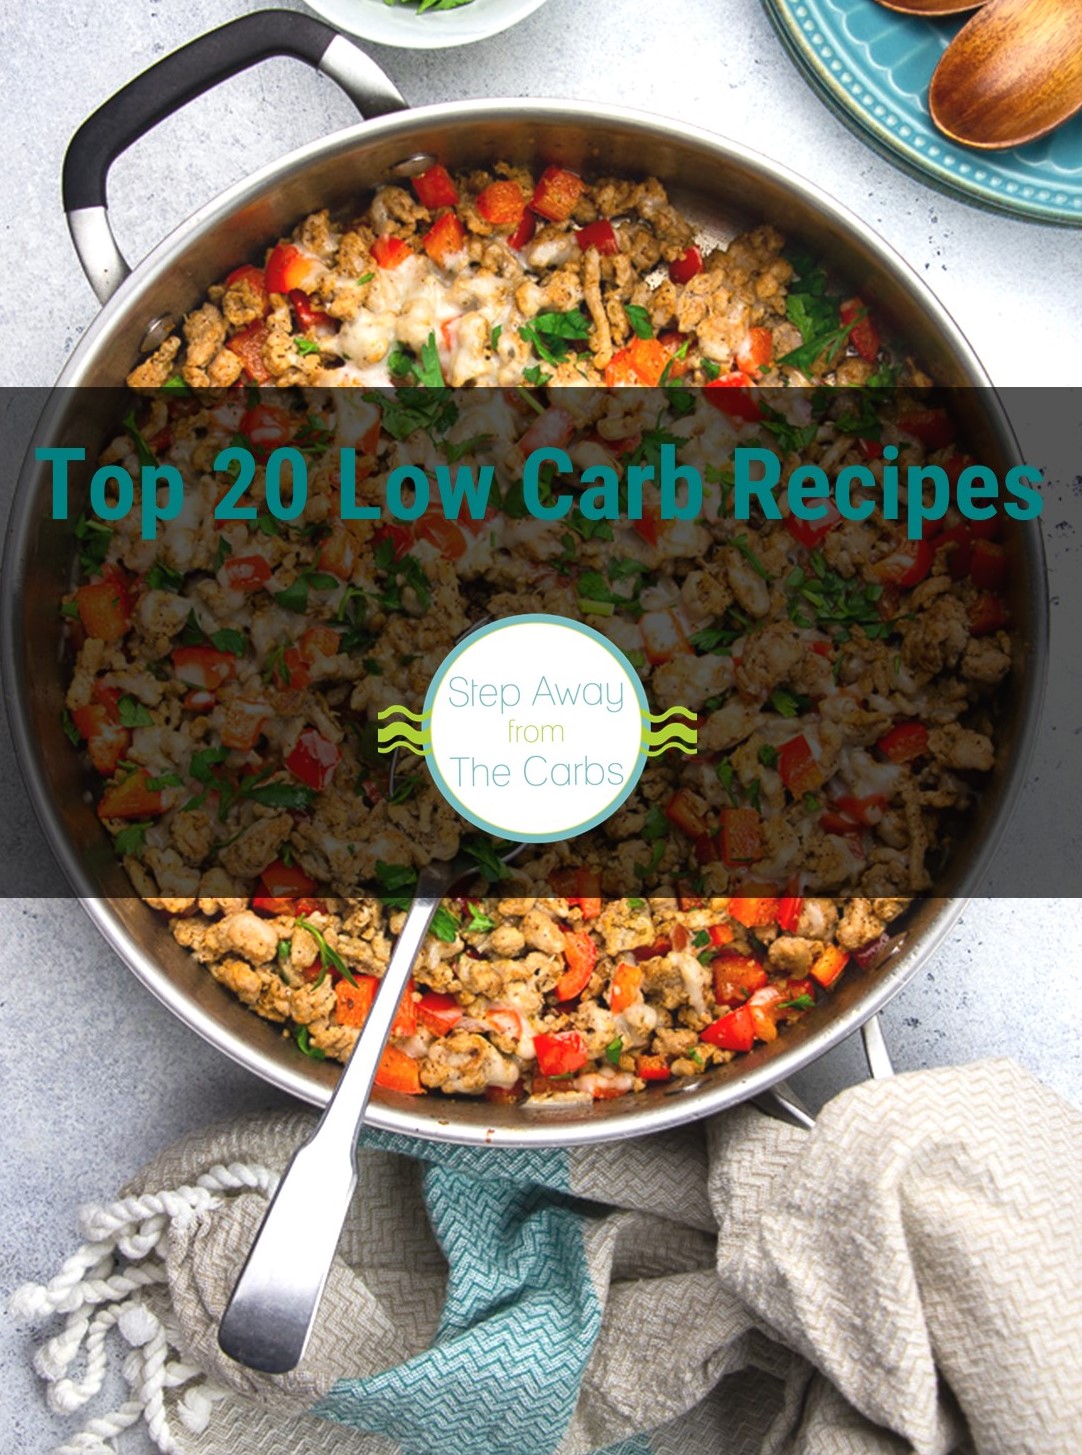 Top 20 Low Carb Recipes Ebook for Subscribers